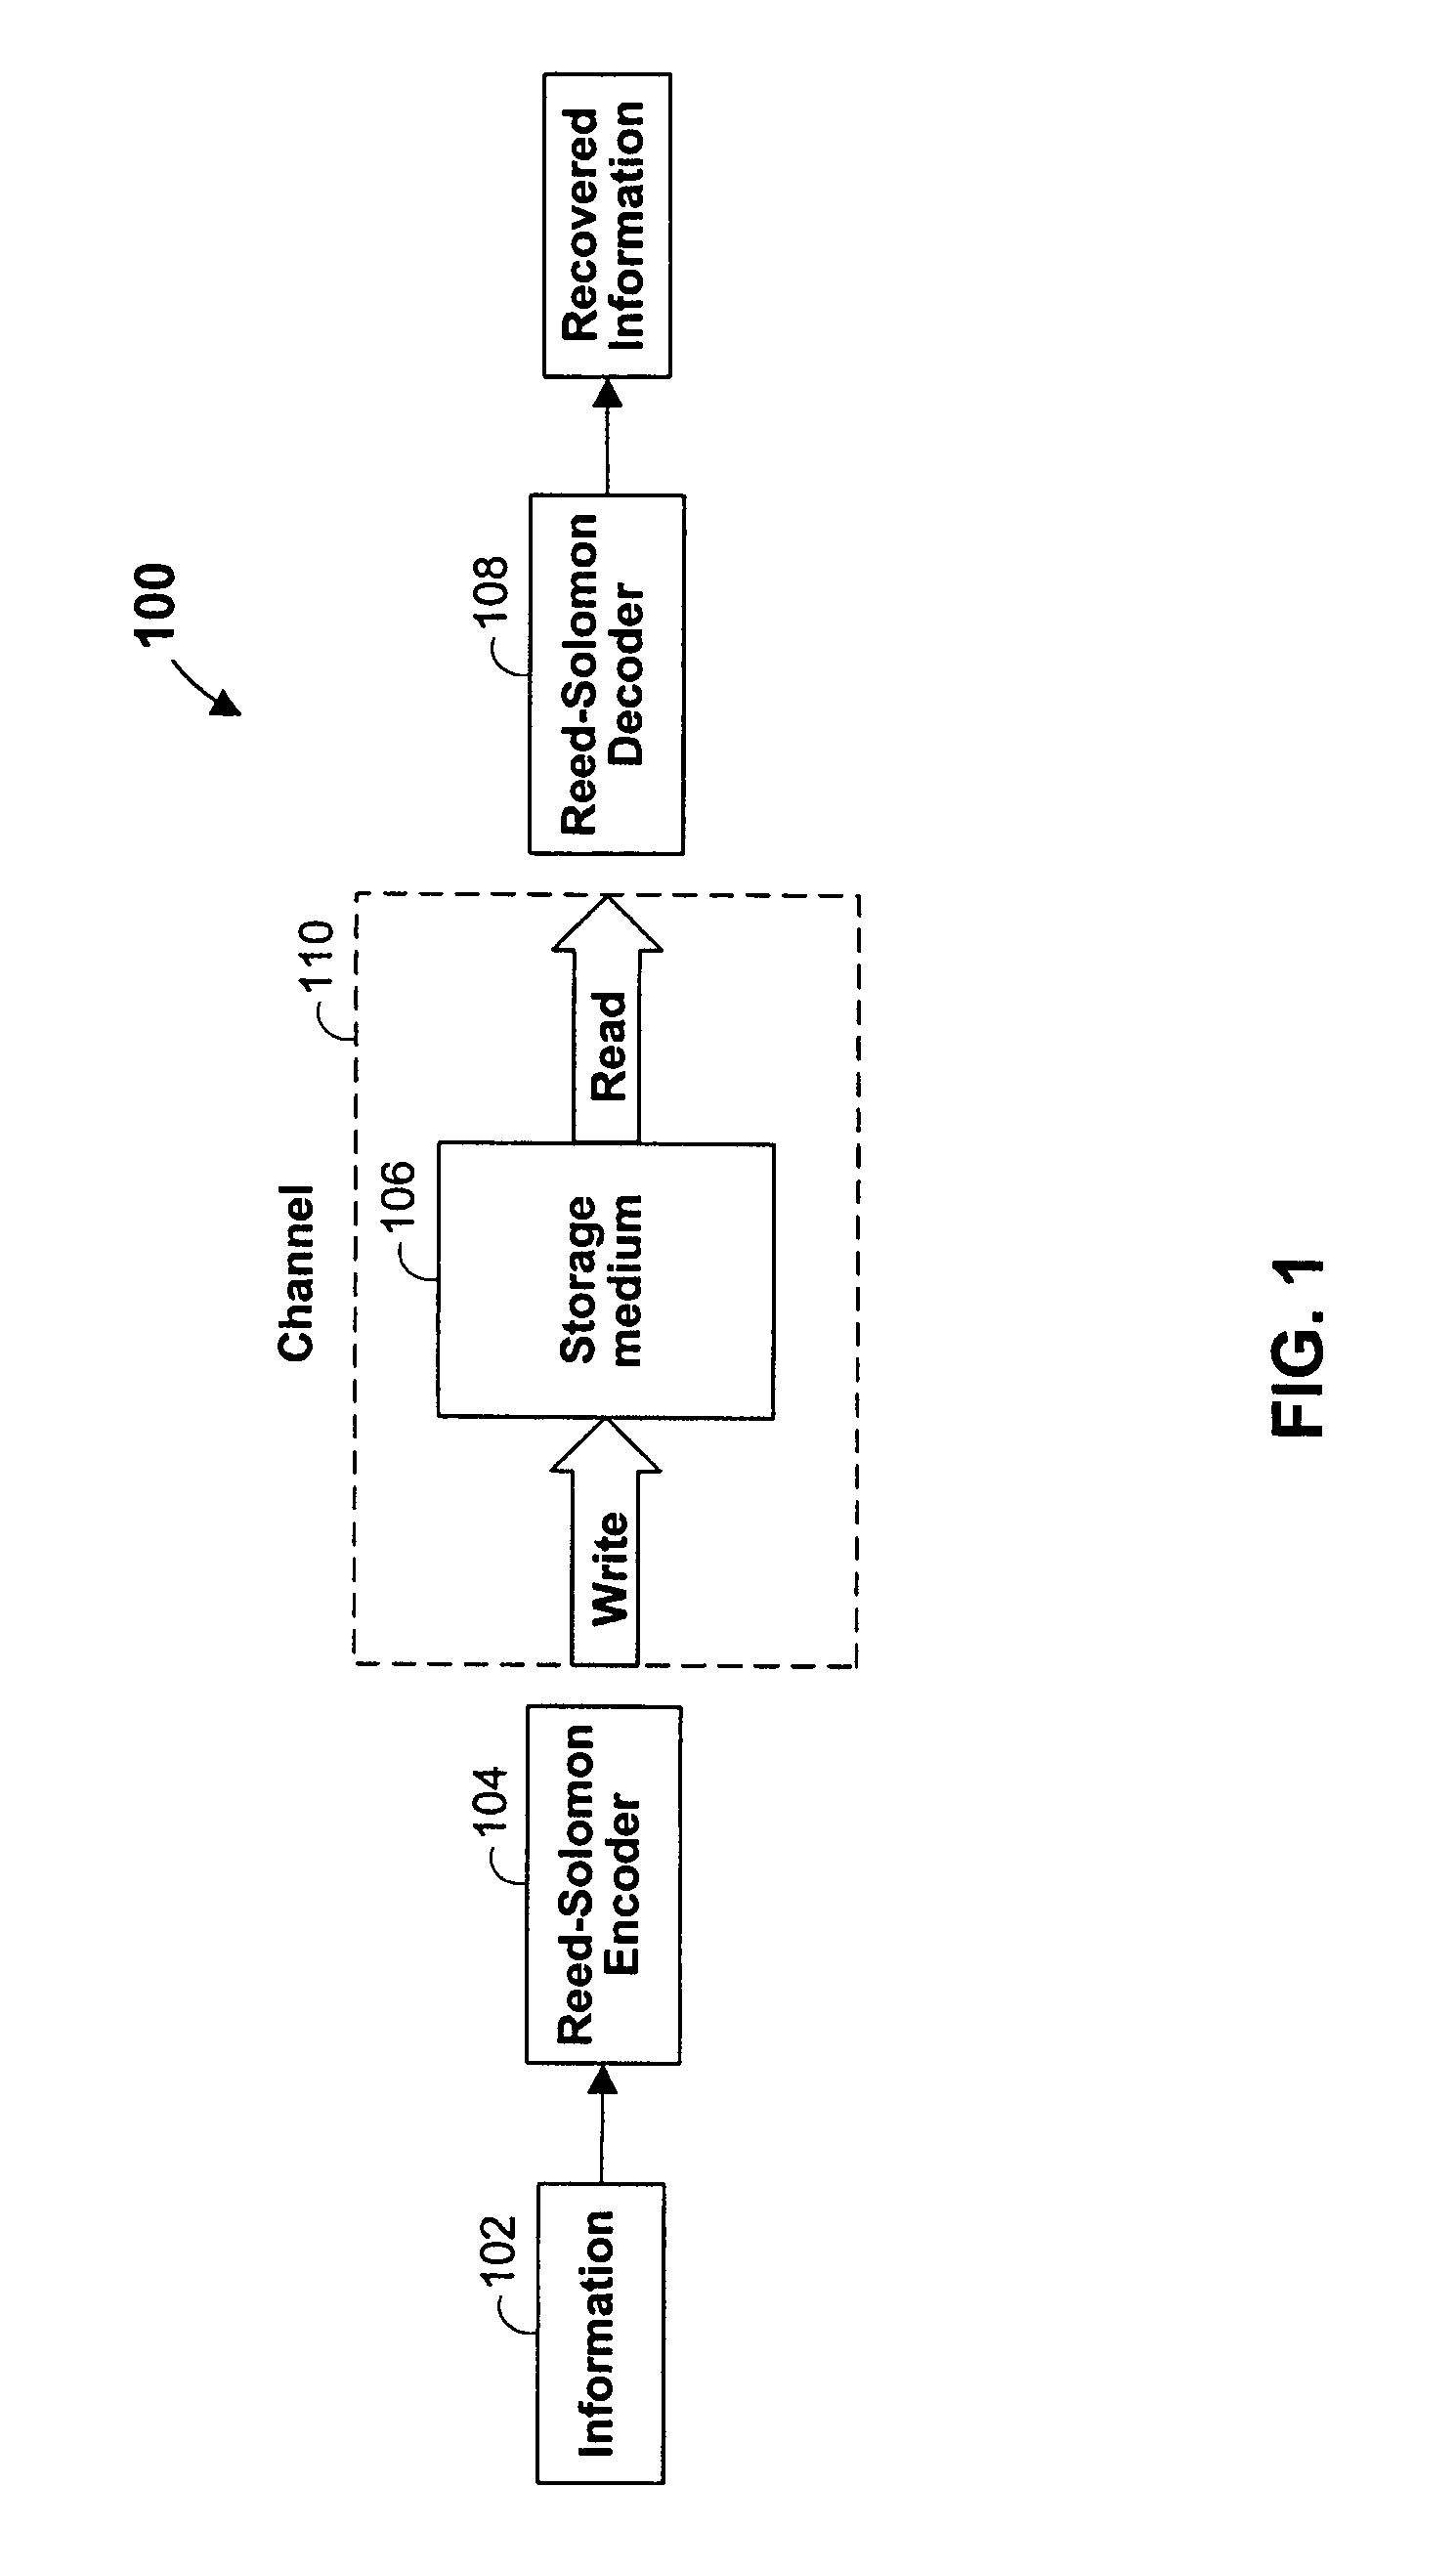 Architecture and control of reed-solomon list decoding